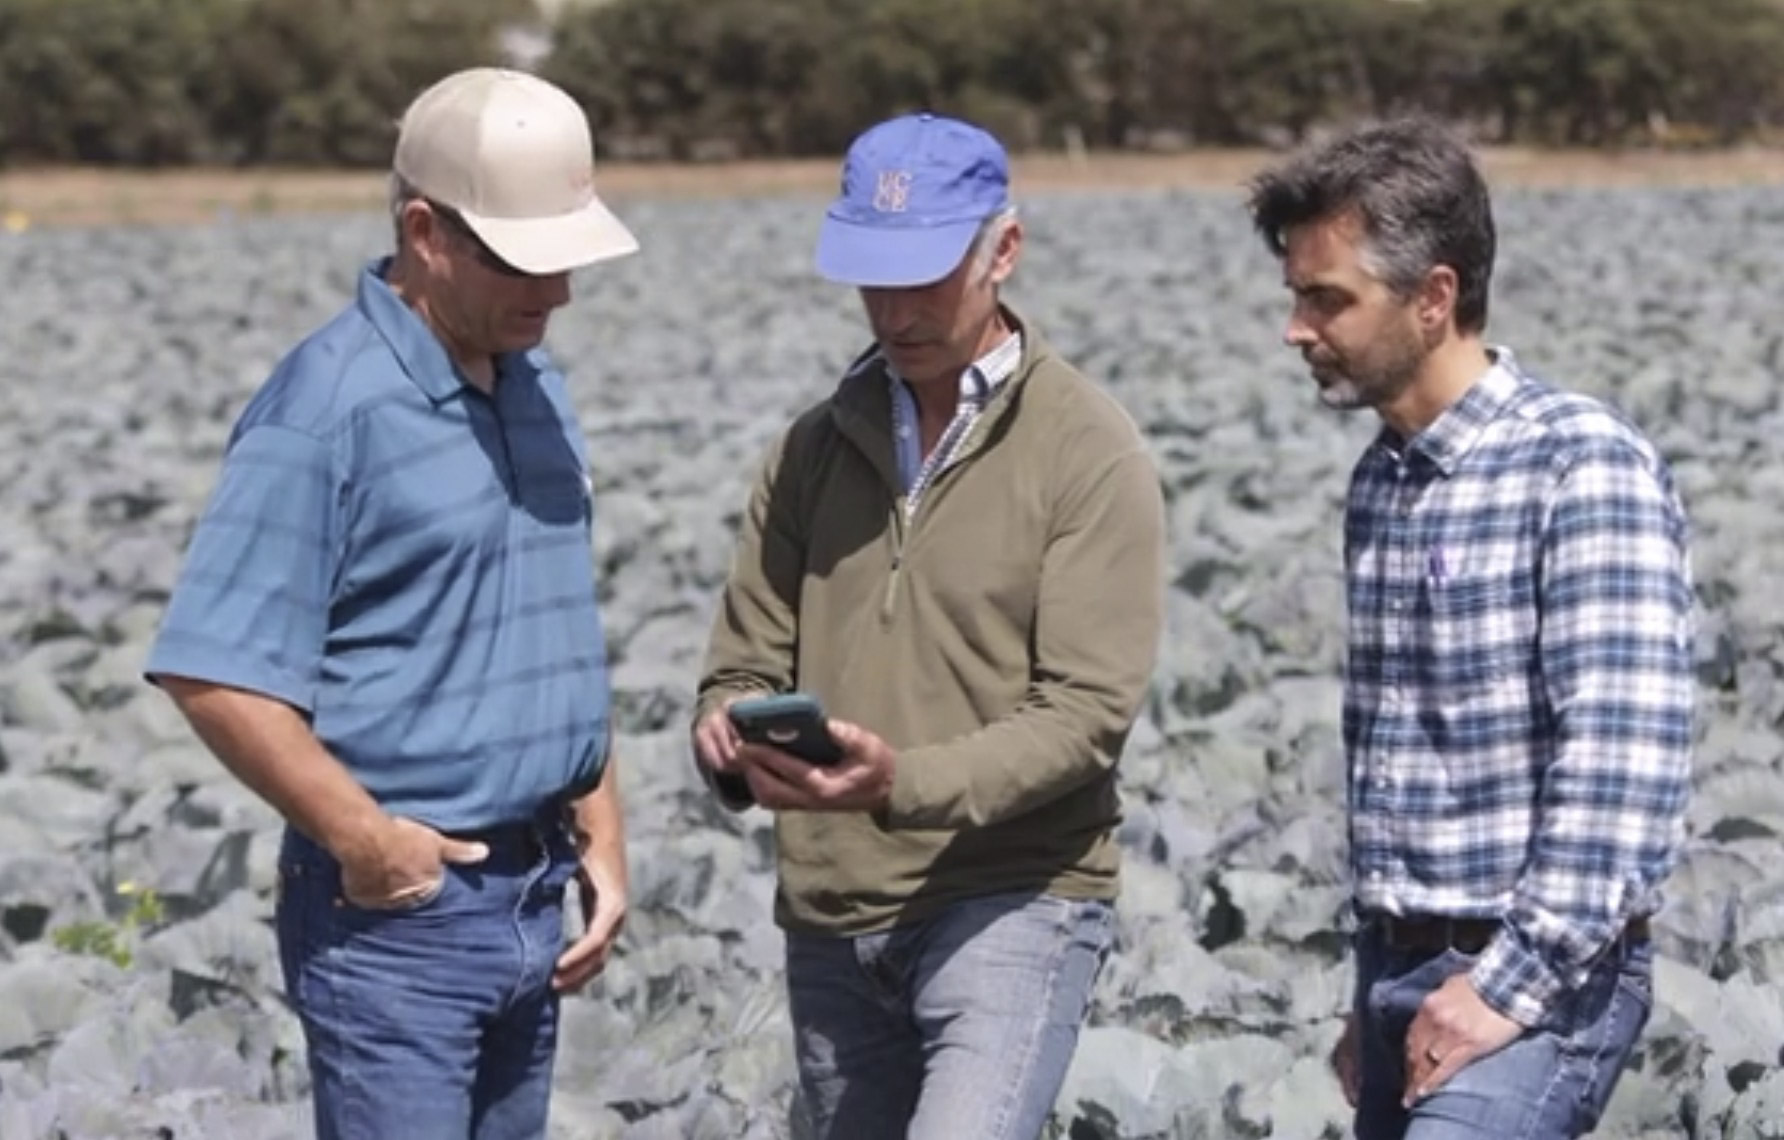 OpenET Program Manager Forrest Melton stands in field with two farmers, checking satellite data on a handheld device.